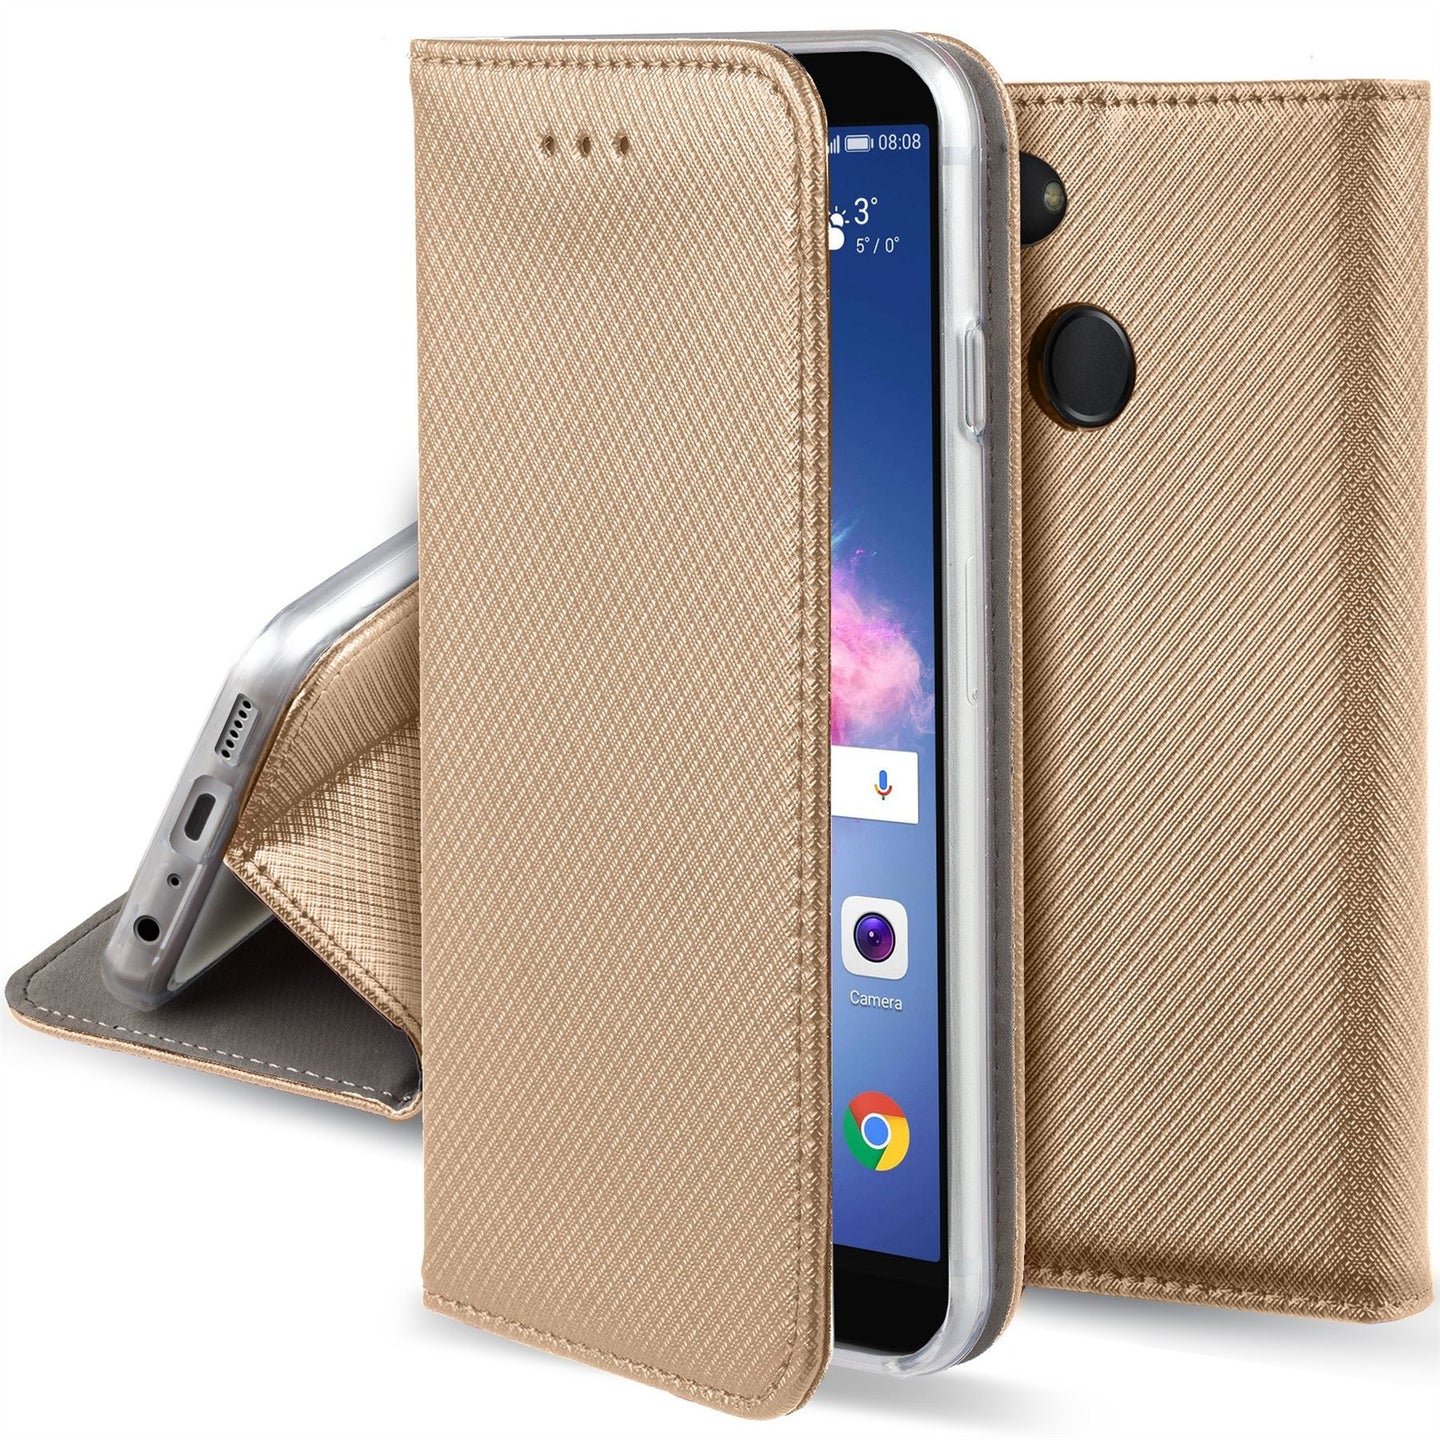 Moozy Case Flip Cover for Huawei P Smart, Gold - Smart Magnetic Flip Case with Card Holder and Stand